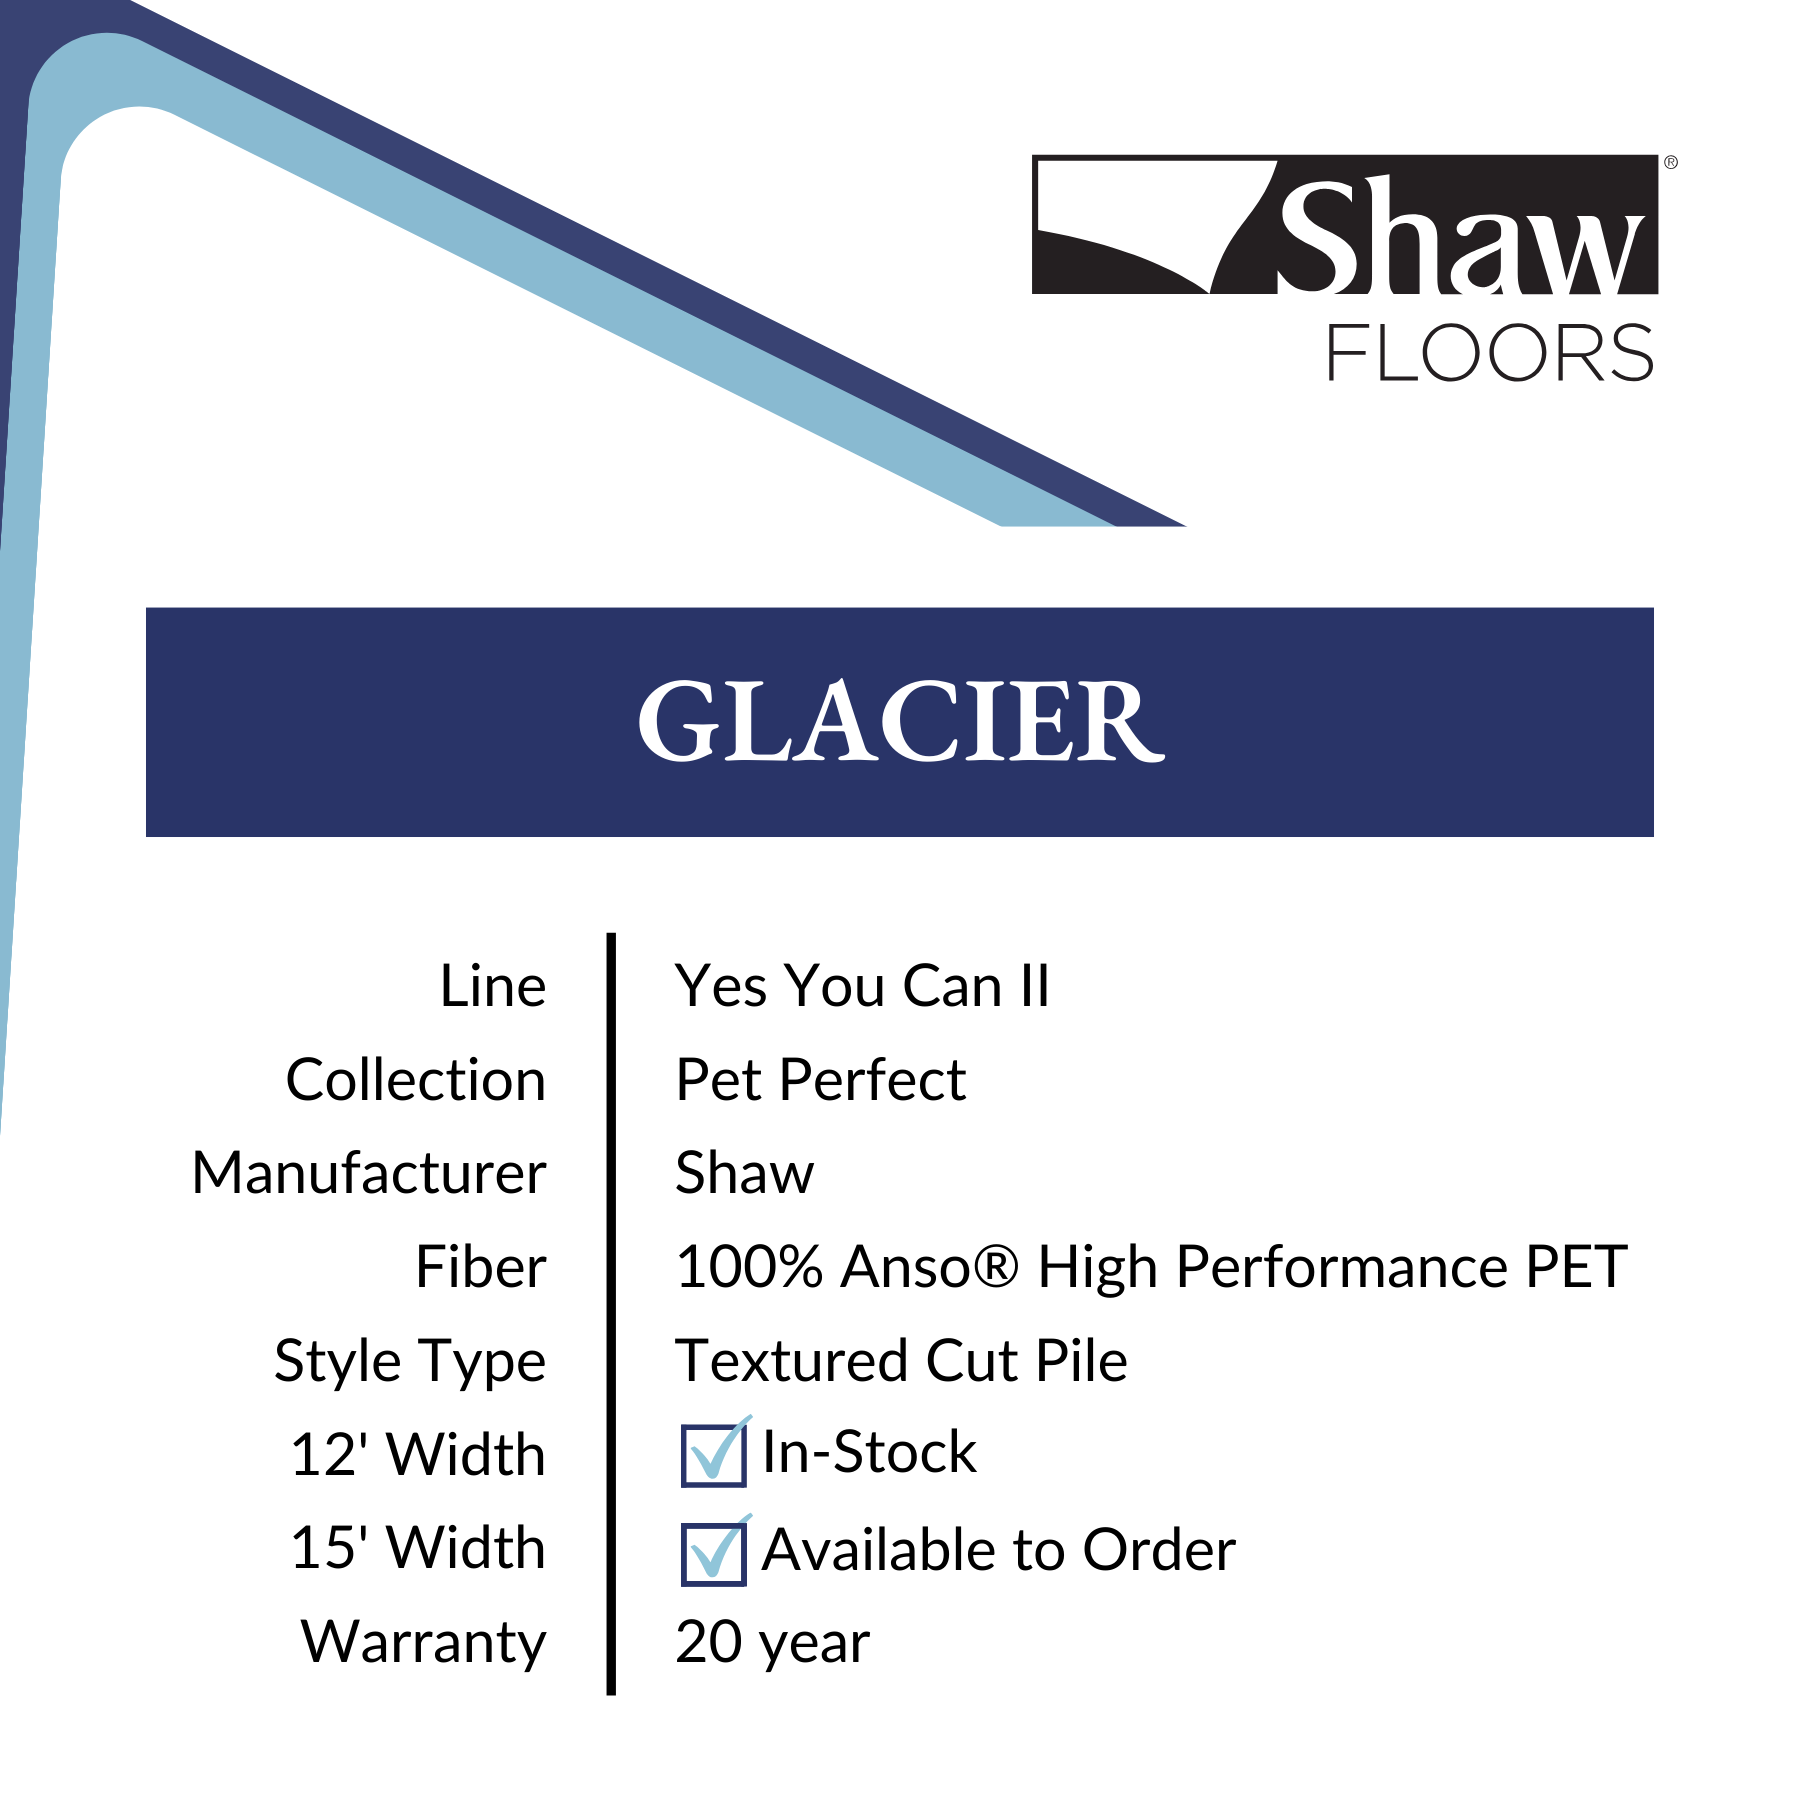 Glacier Shaw Pet Perfect Yes You Can II Carpet from Calhoun's Specs